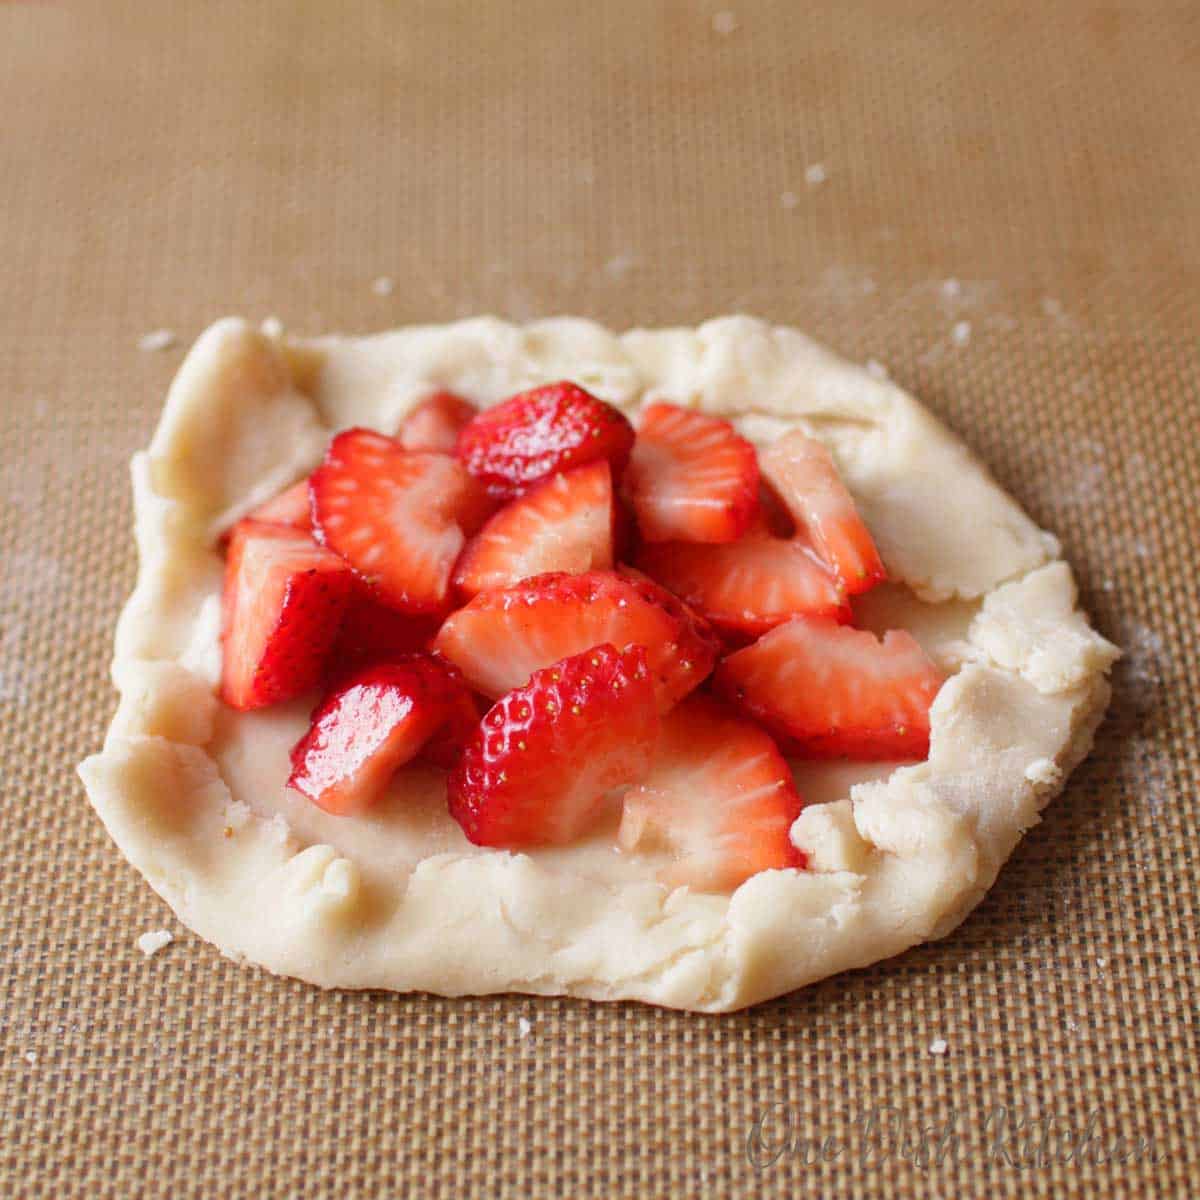 Small uncooked pie crust topped with fresh sliced strawberries.